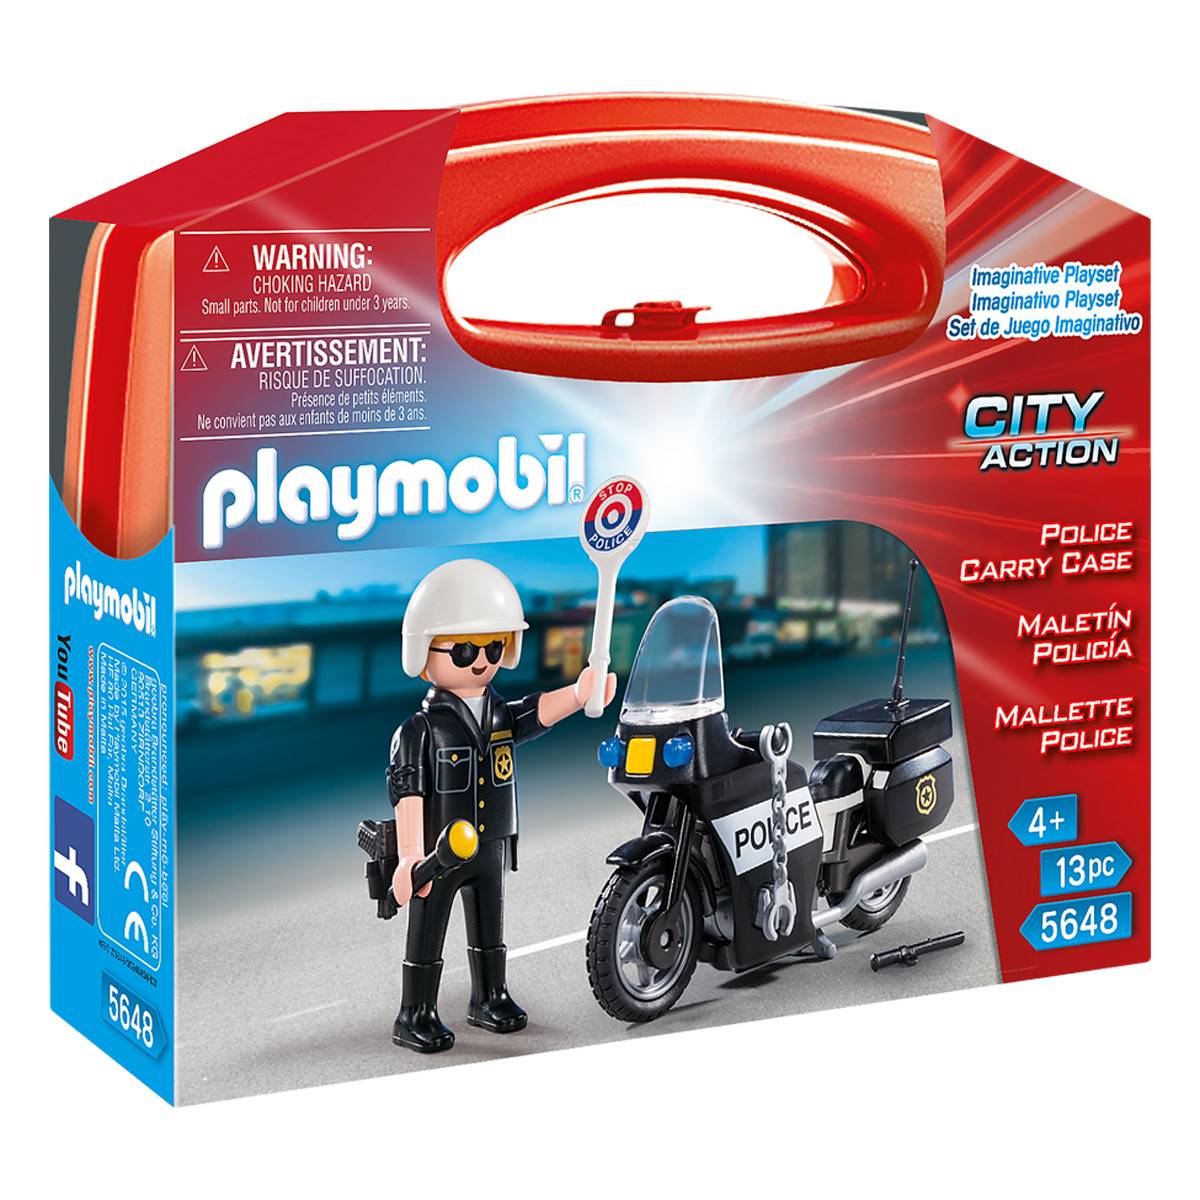 Playmobil(R) Police Carry Case